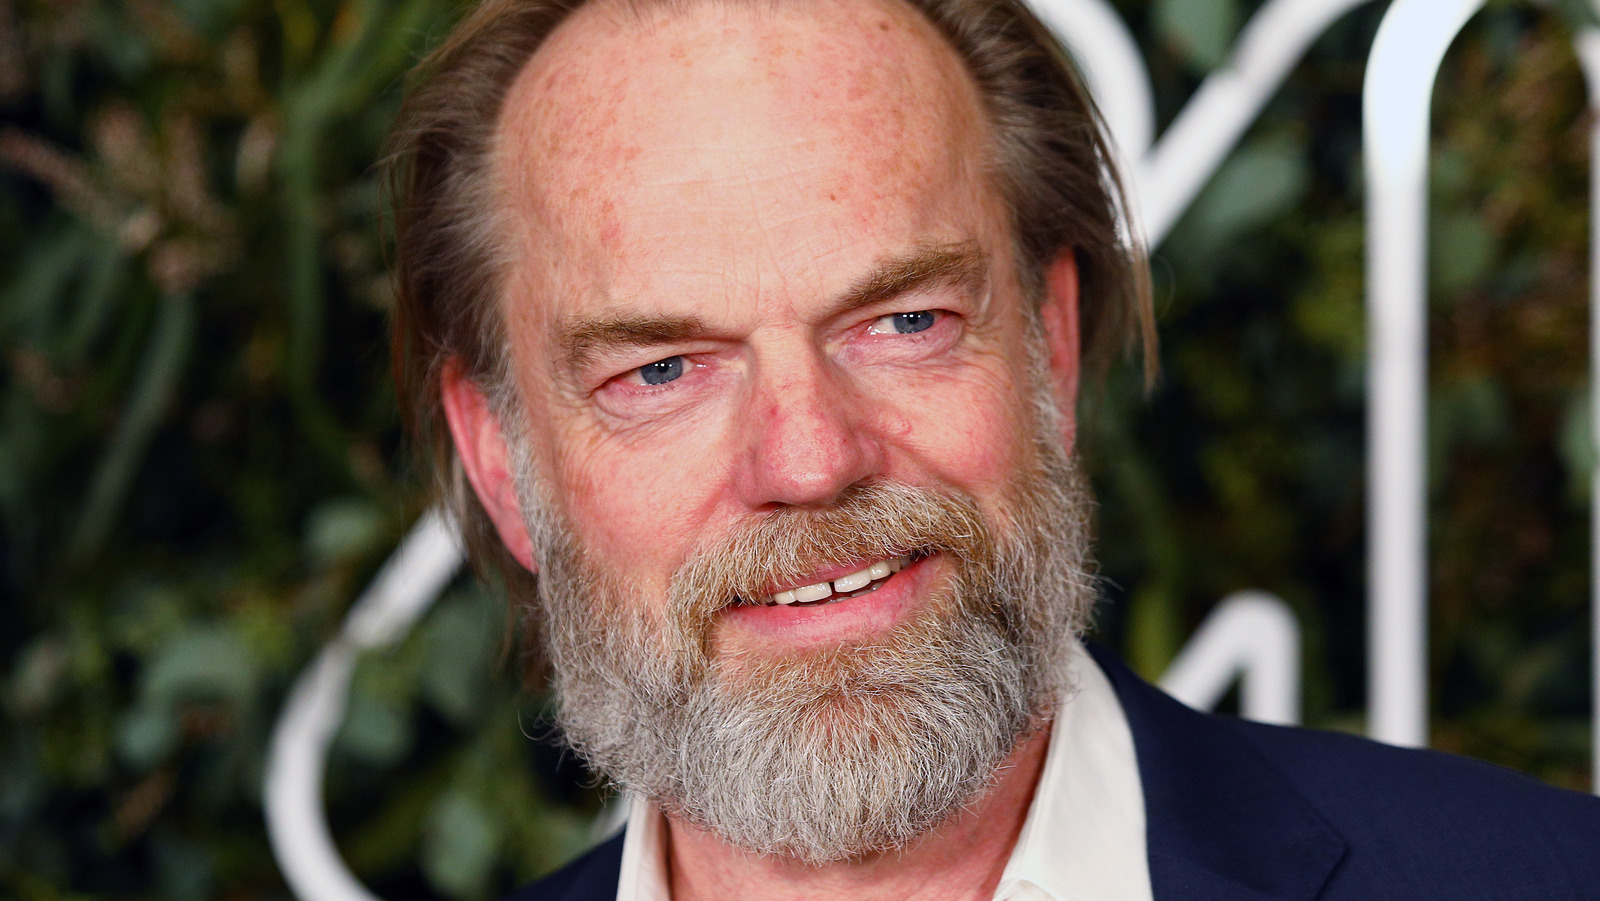 Transformers 4 New Lead Cast? Also, Hugo Weaving on Voicing Megatron